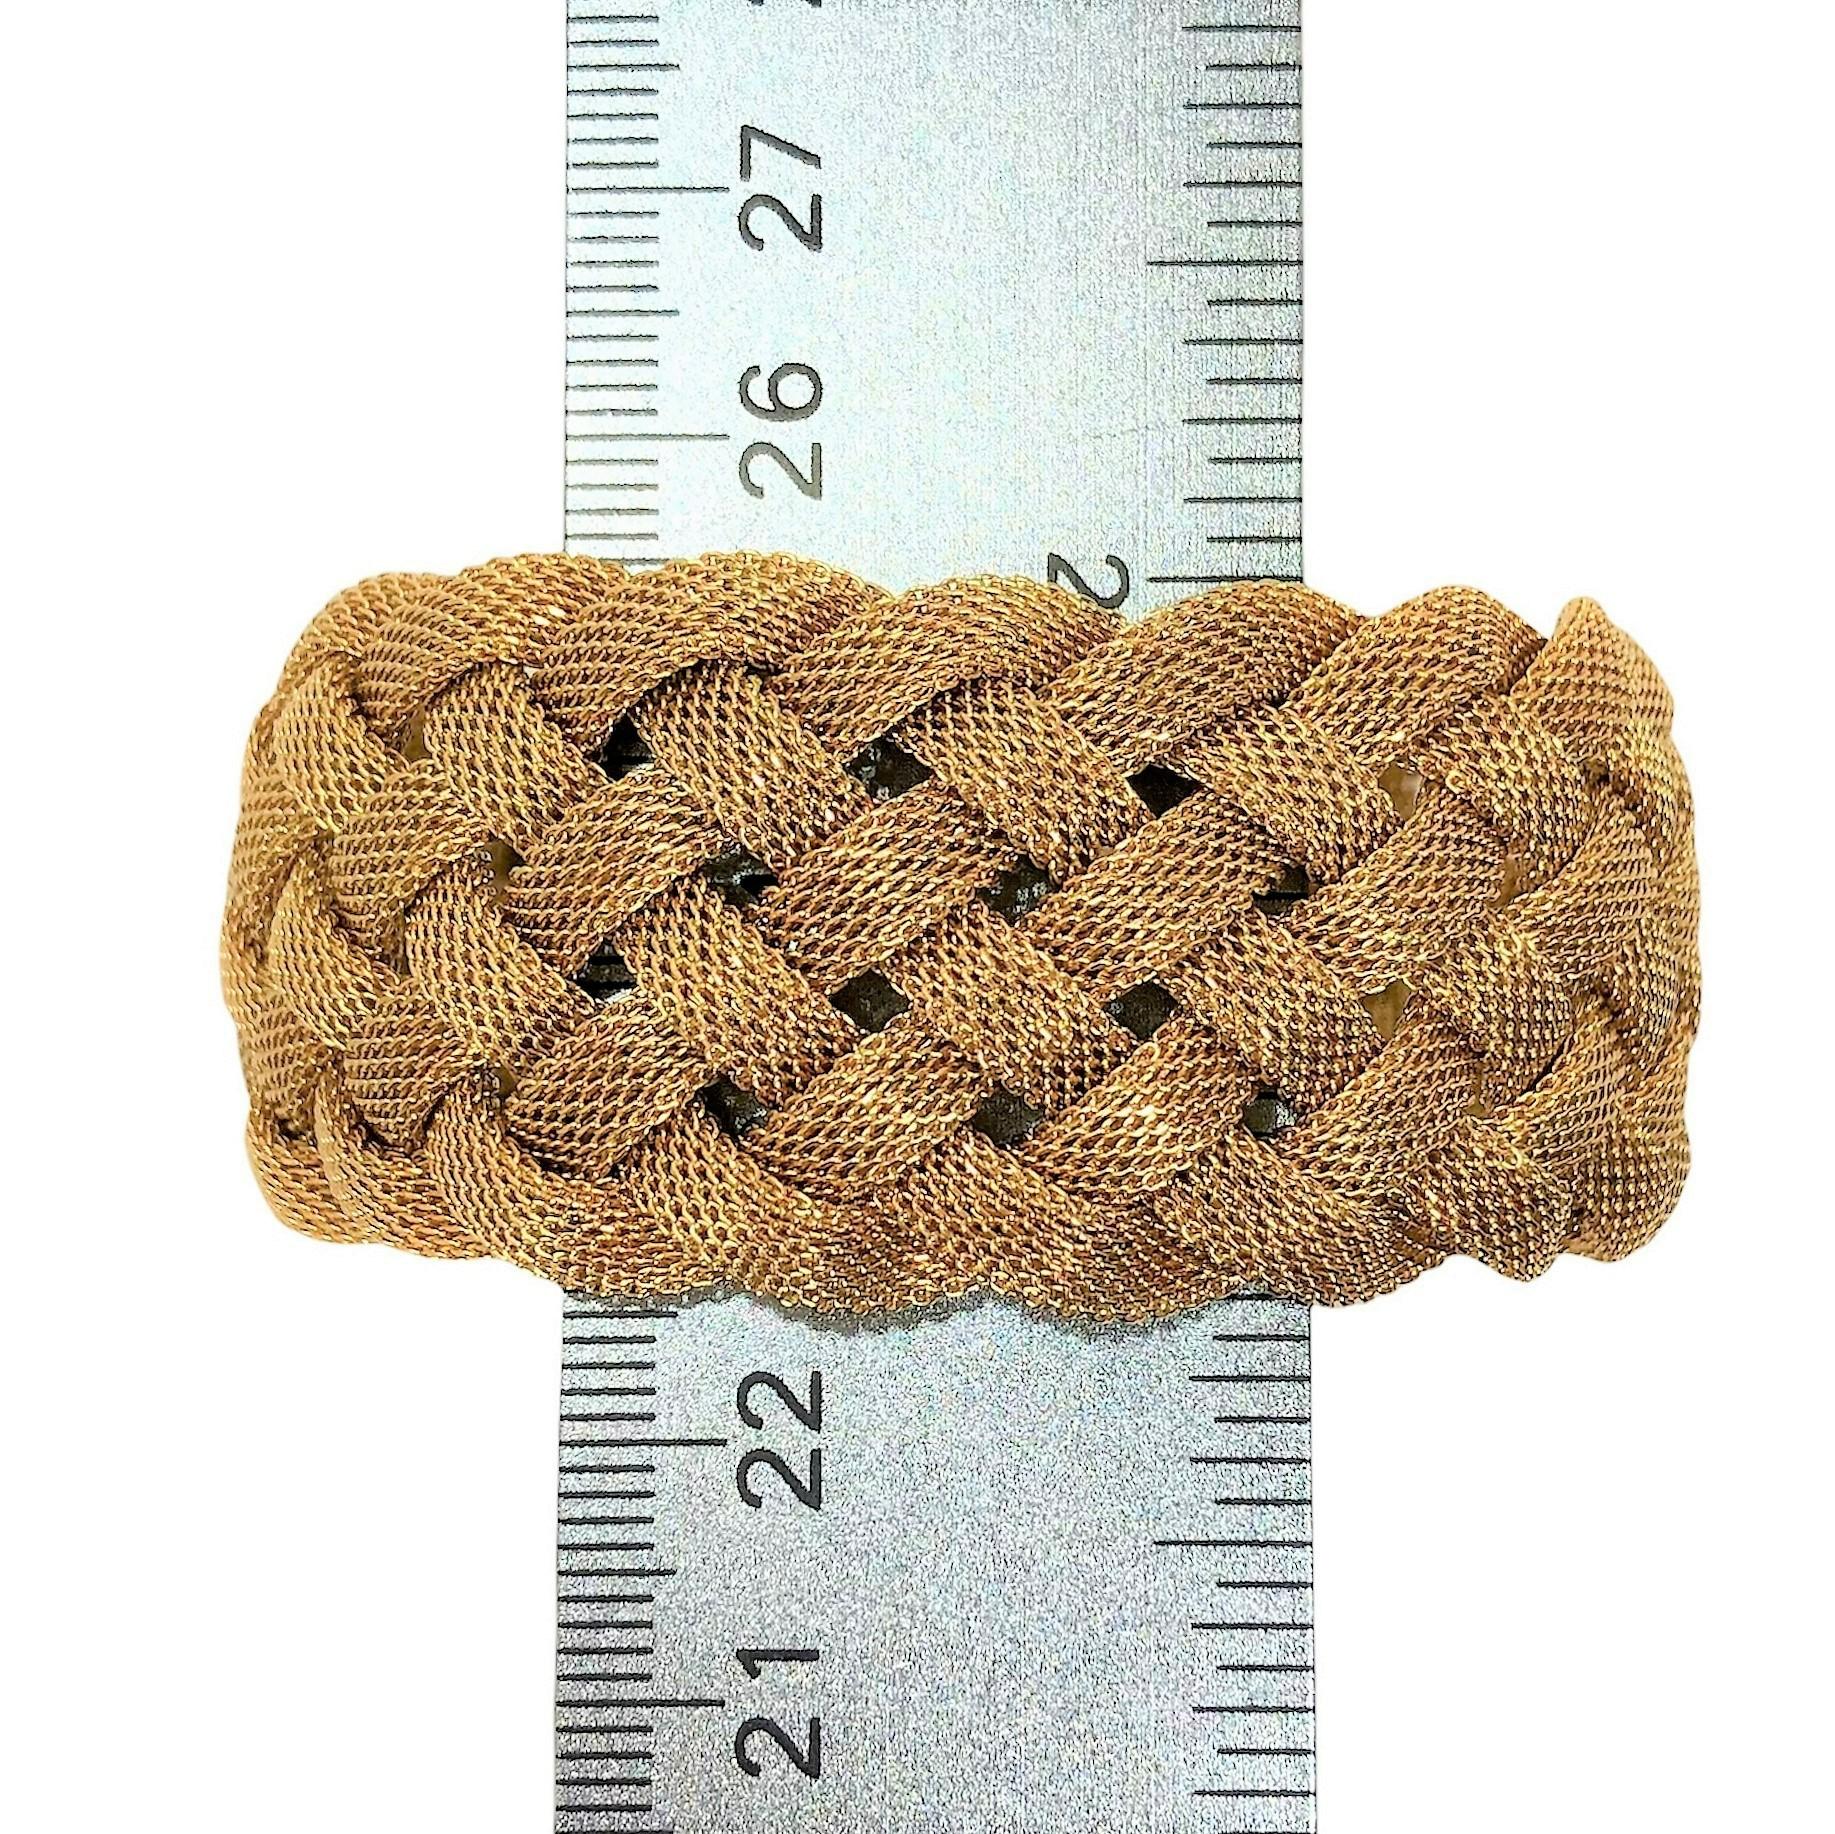 Made by Tiffany & Co late in the 20th Century, this 18K yellow gold mesh bracelet has a curved, bombee look to it. Rather than just laying flat, the 7 curved mesh strands, stand off the arm giving it a more substantial look and feeling. Measures 1